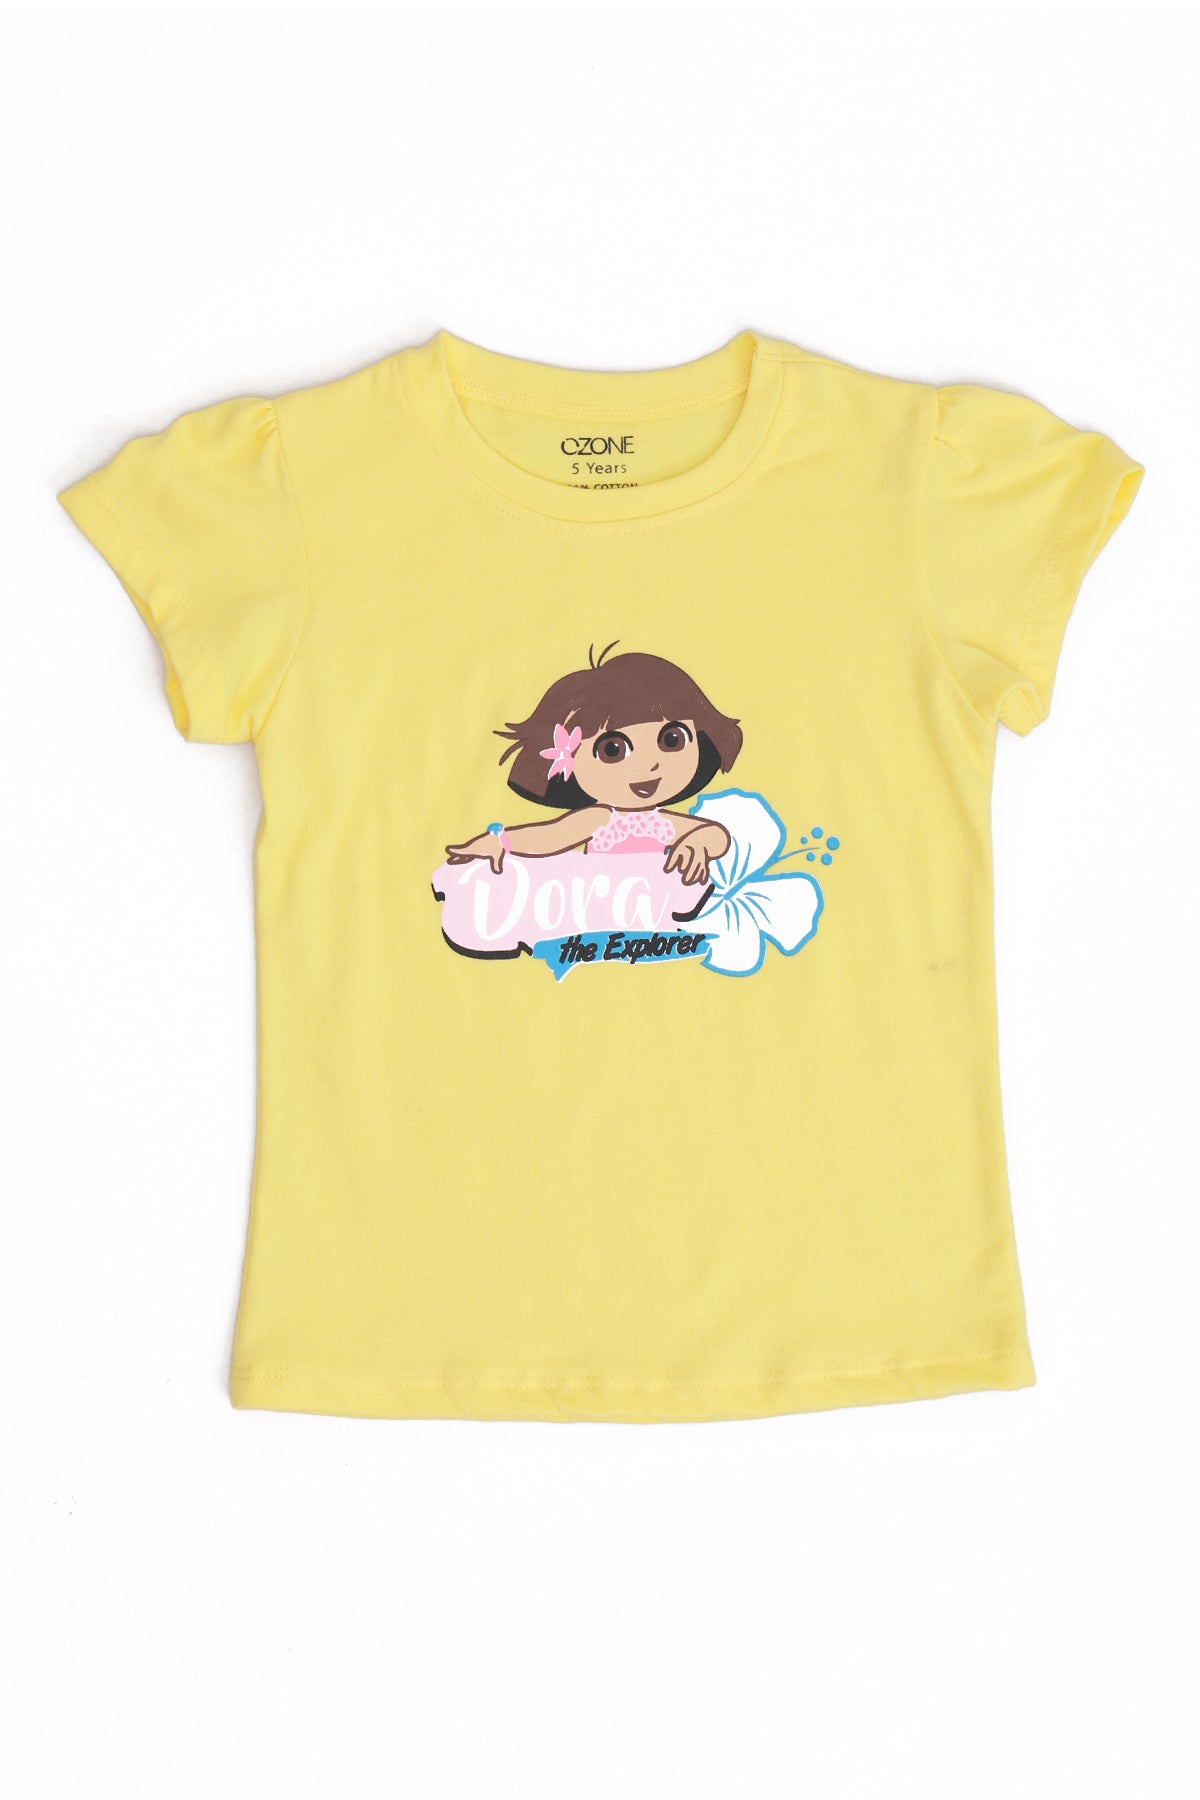 Ozone Kids Girls Without Collar Casual T-Shirt